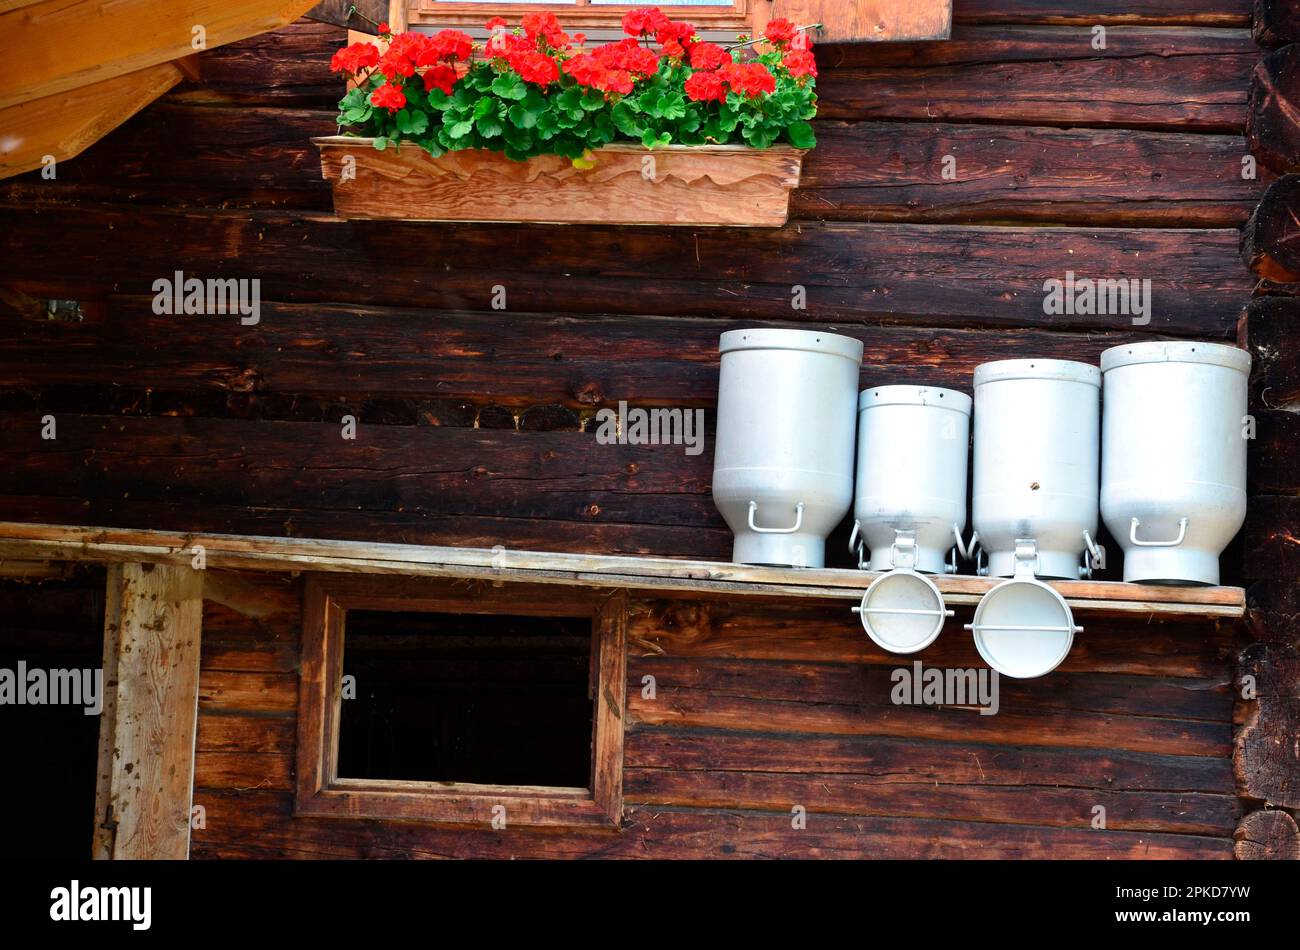 Country idyll, barn, milk cans, flower box Stock Photo